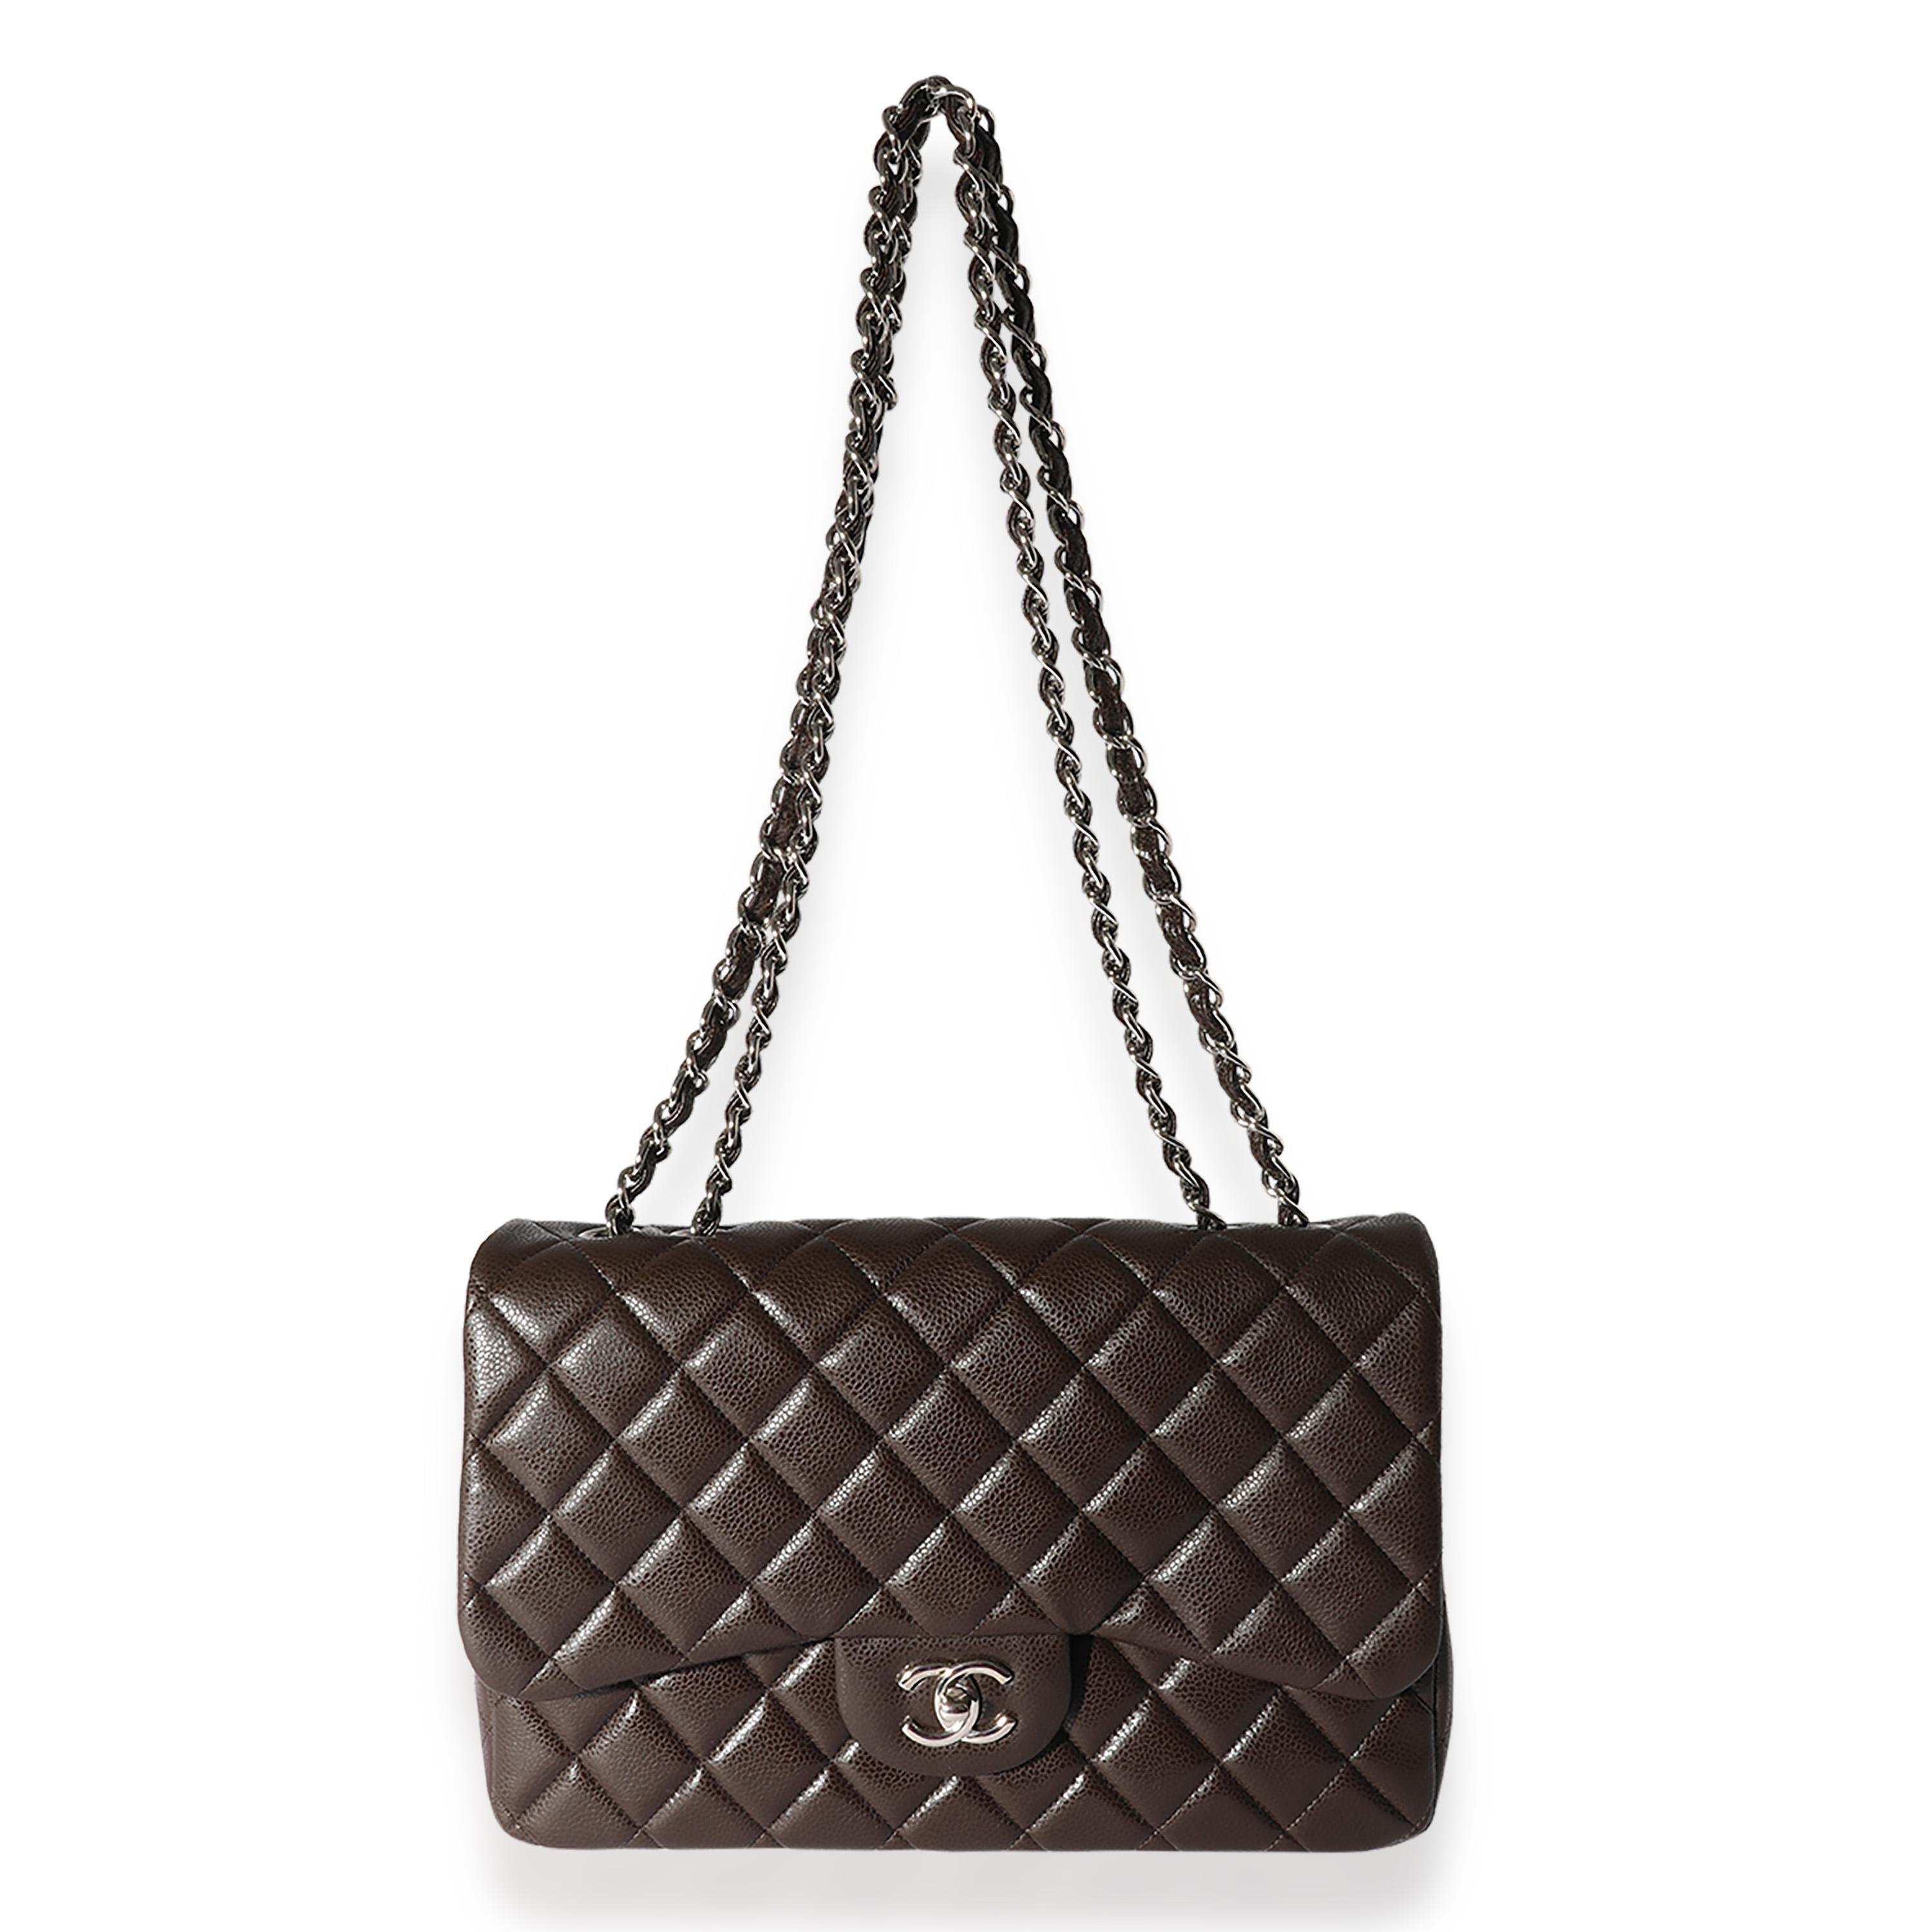 Listing Title: Chanel Brown Caviar Leather Classic Jumbo Singl Flap
SKU: 125782
MSRP: 9500.00
Condition: Pre-owned 
Handbag Condition: Excellent
Condition Comments: Excellent Condition. No visible signs of wear.
Brand: Chanel
Model: Chanel Brown